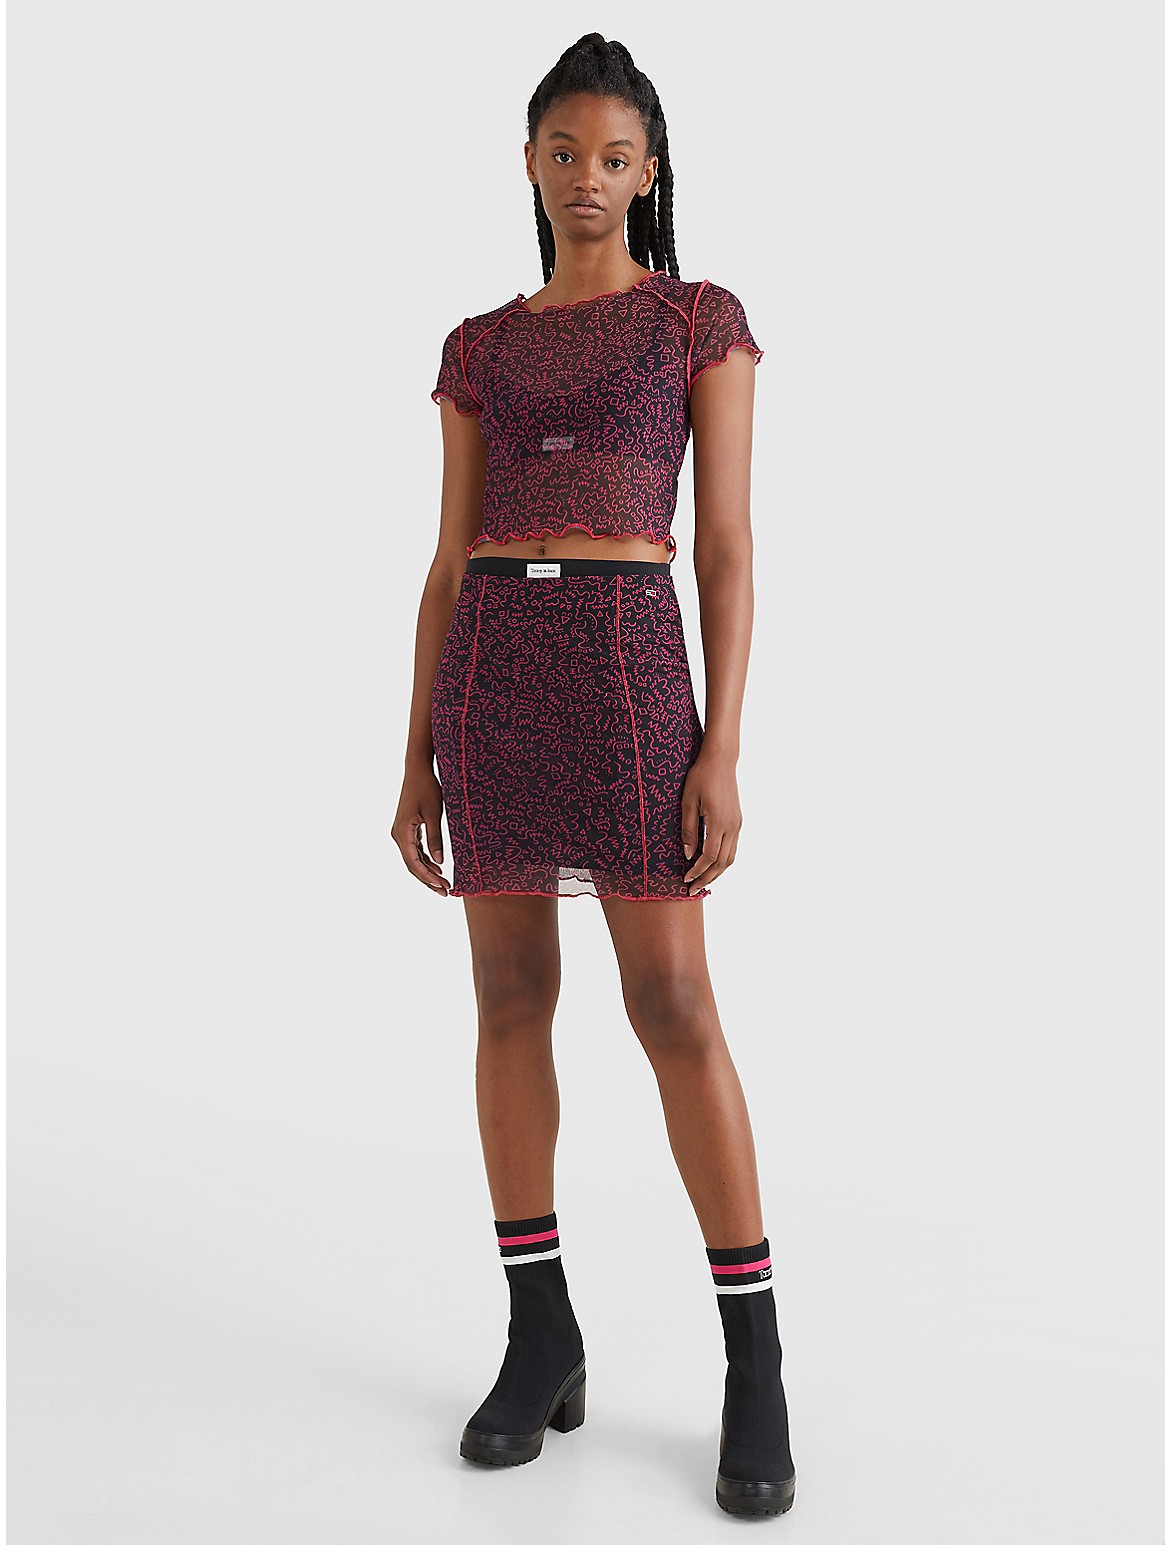 Tommy Hilfiger Graffiti Mesh Top In Pink Doodle Print